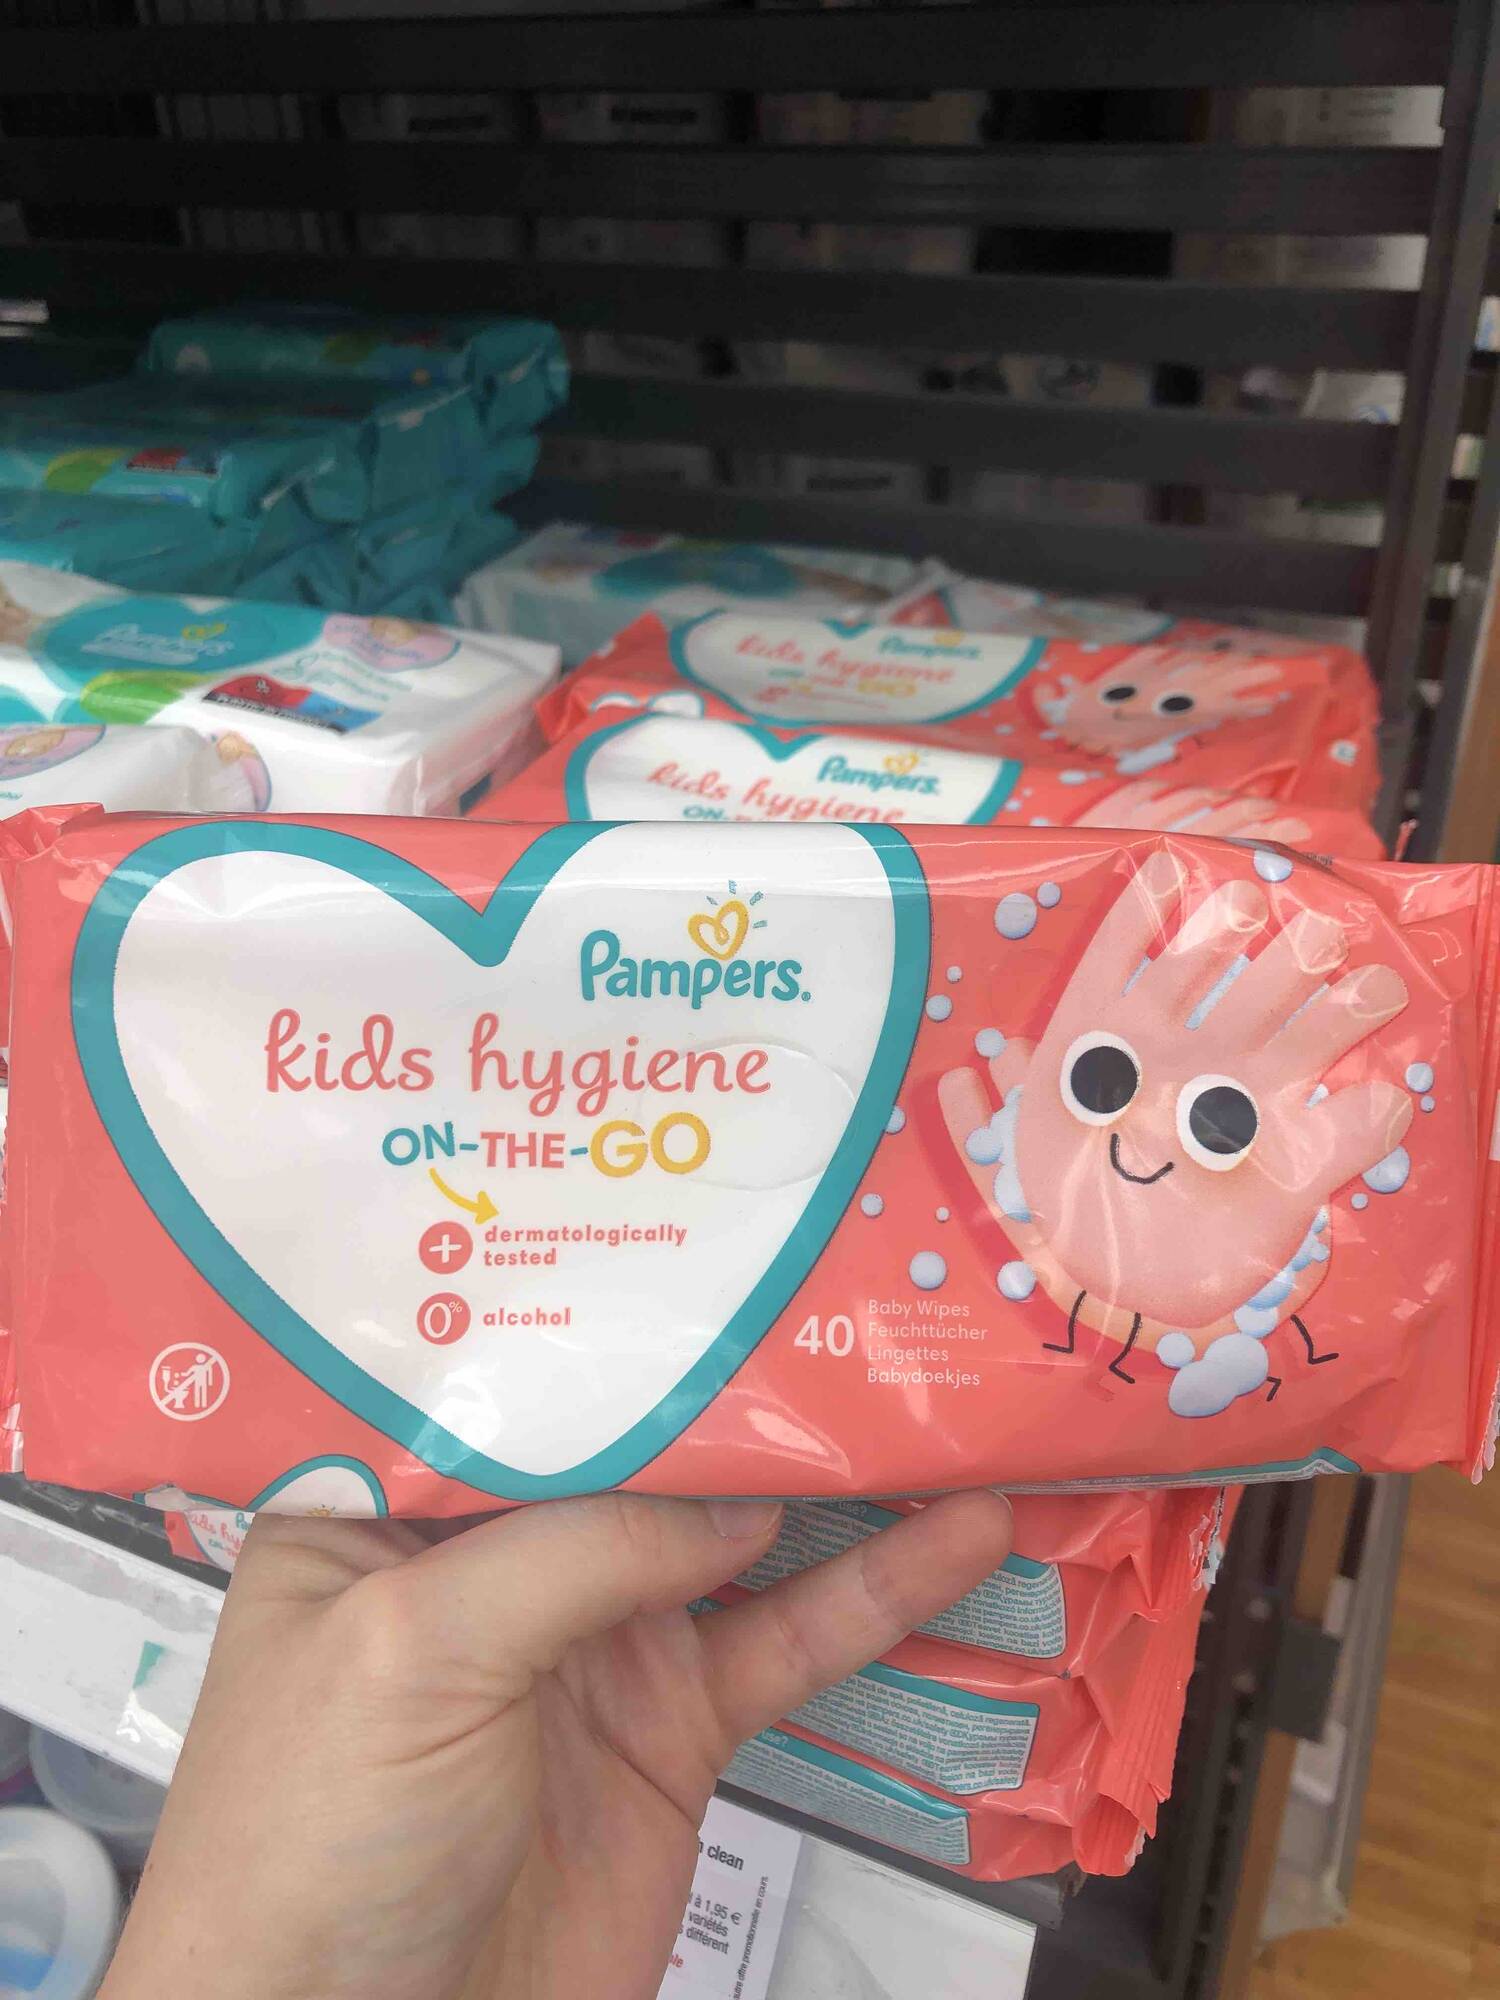 PAMPERS - Kids hygiene on-the-go - Baby wipes